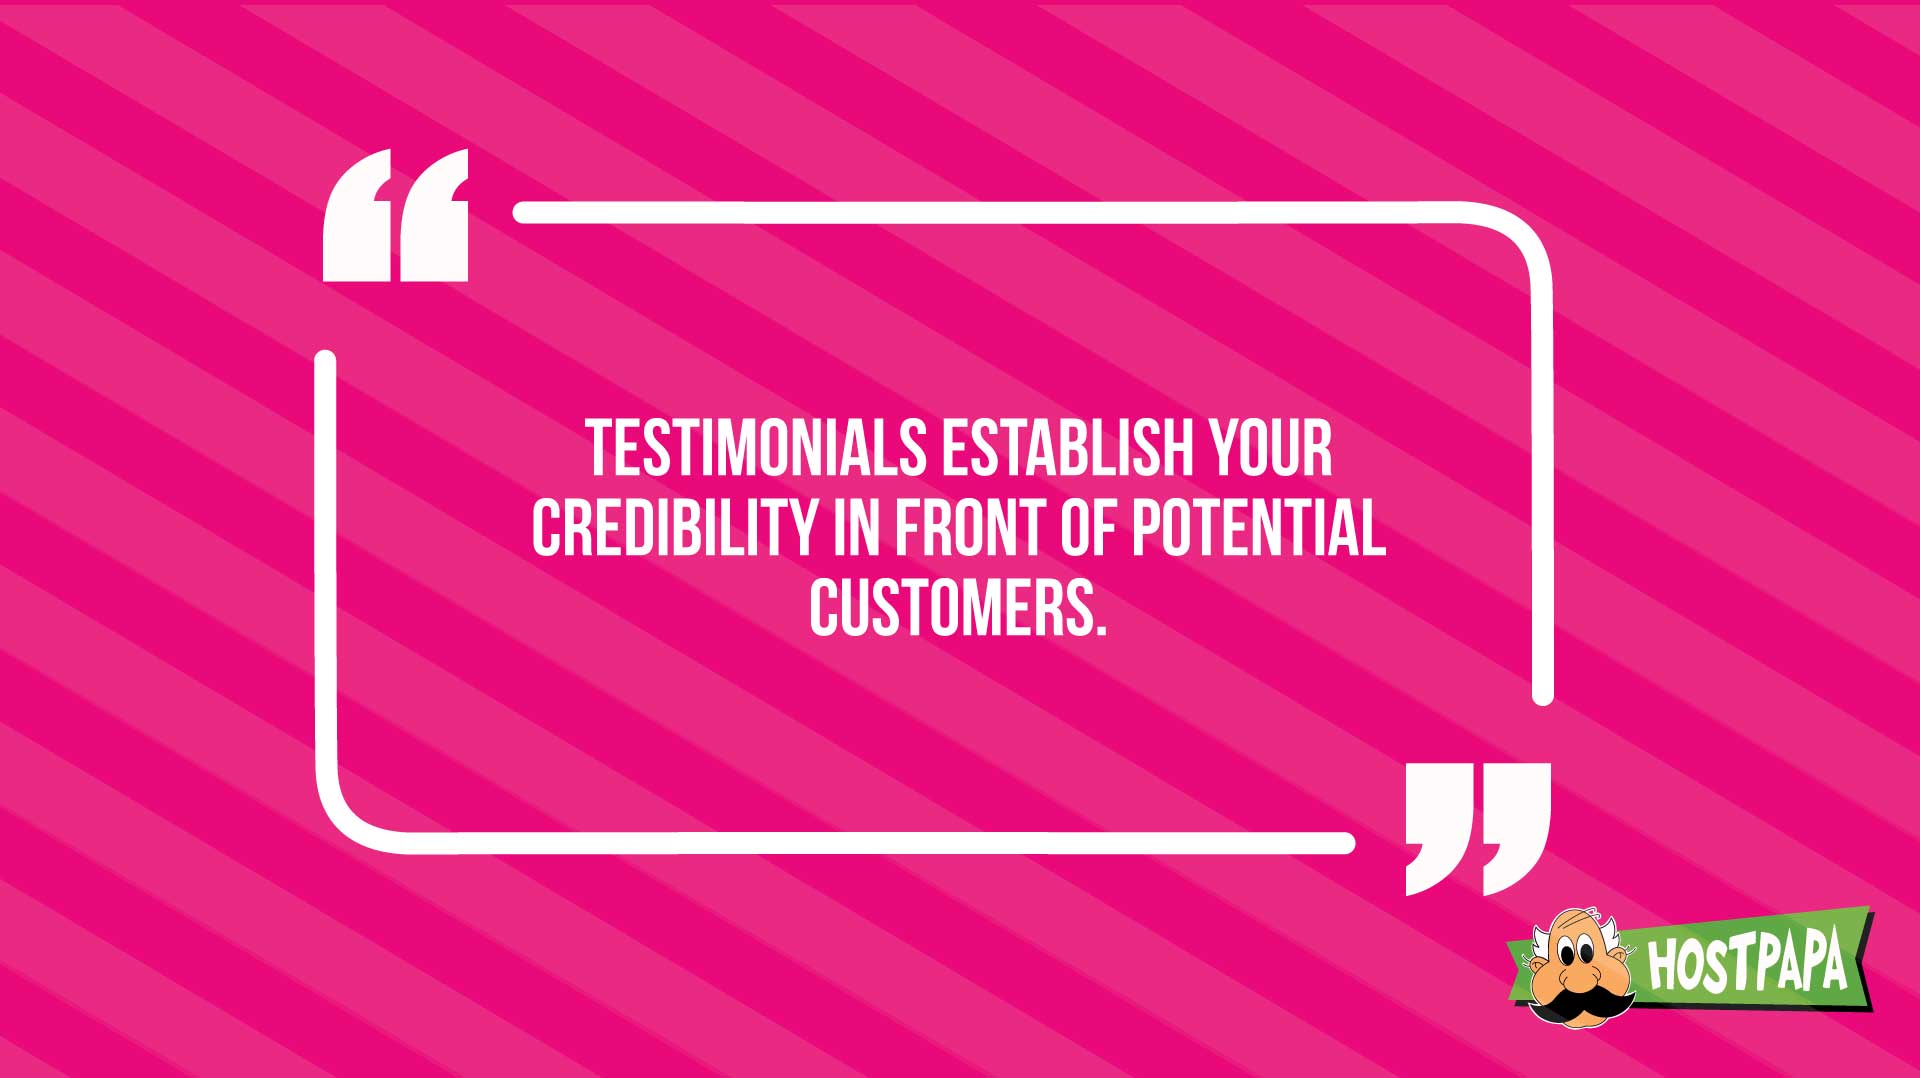 Get more customers through credibility